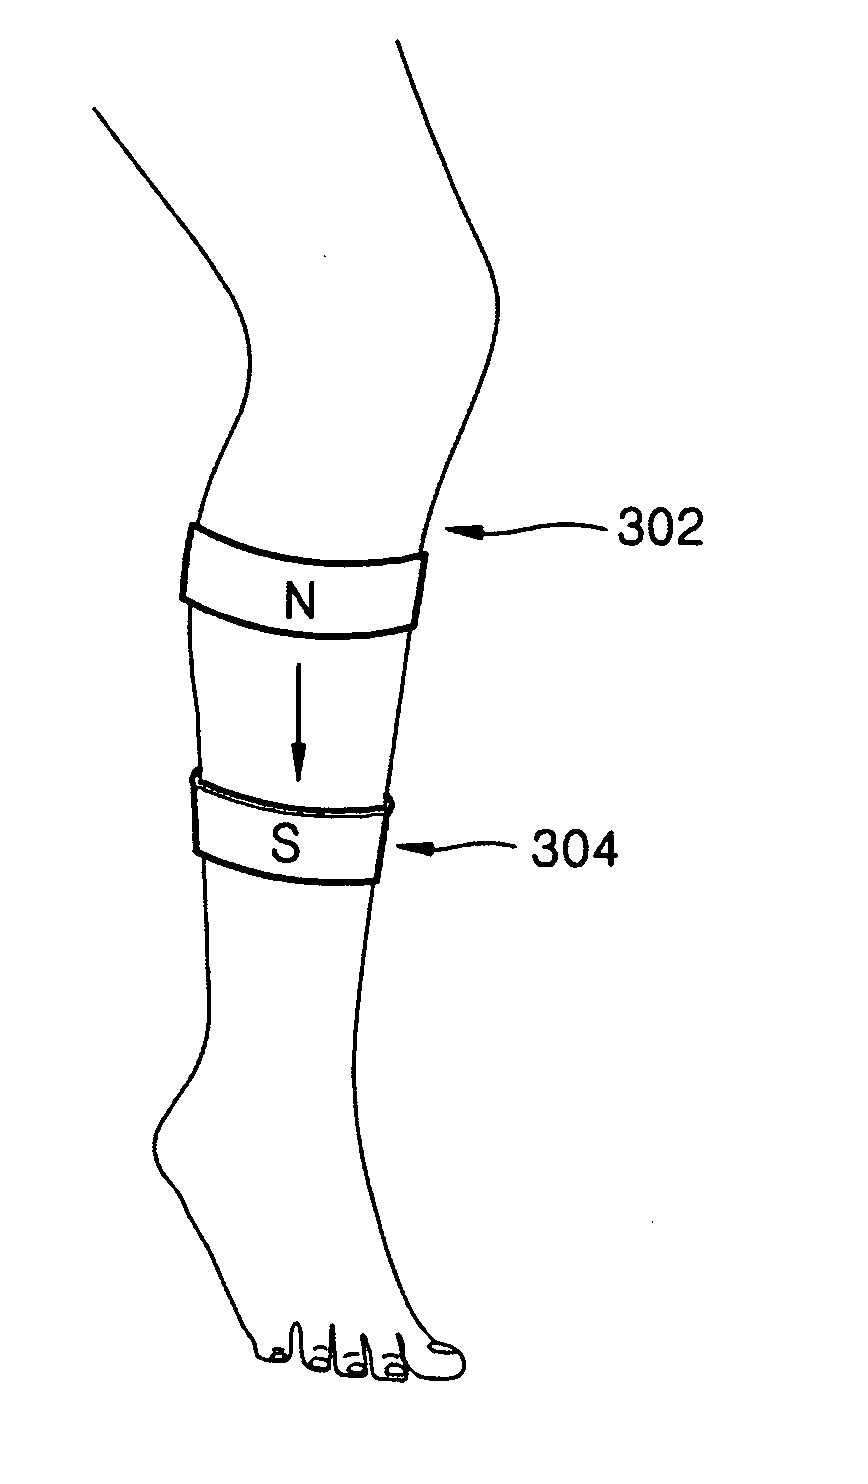 Apparatus and method for controlling blood circulation using a magnetic field